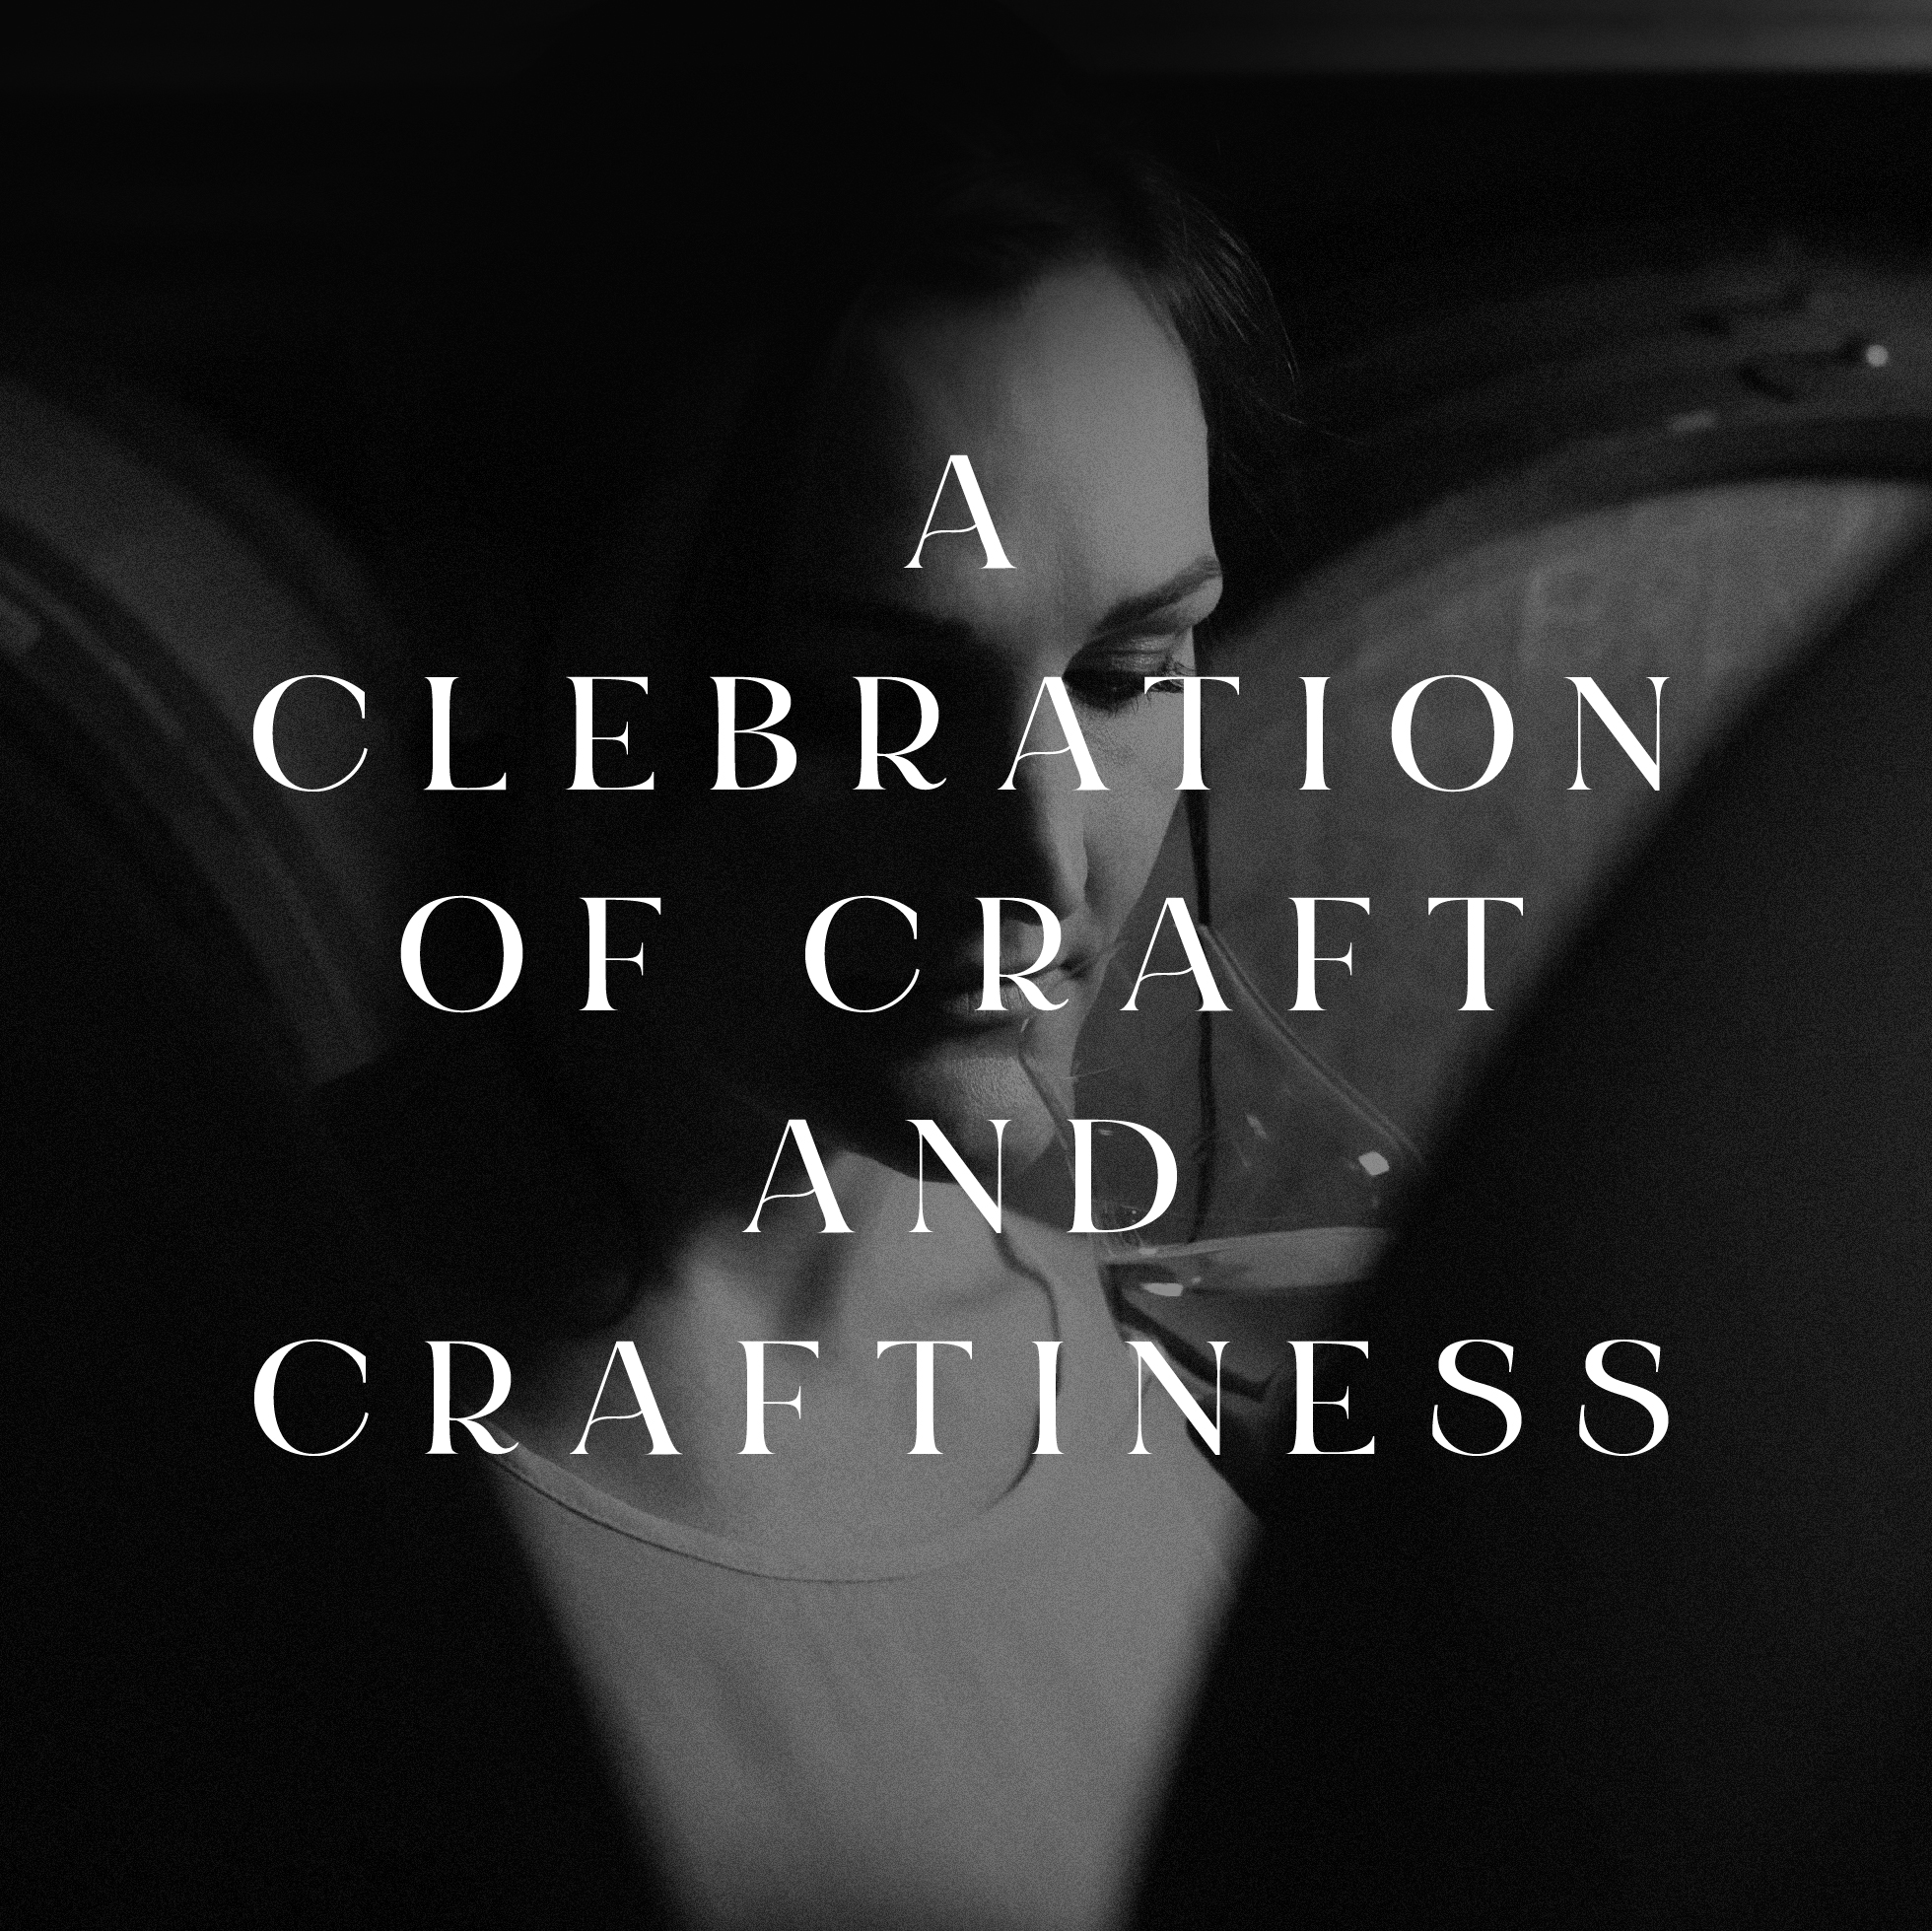 A Celebration of Craft and Craftiness